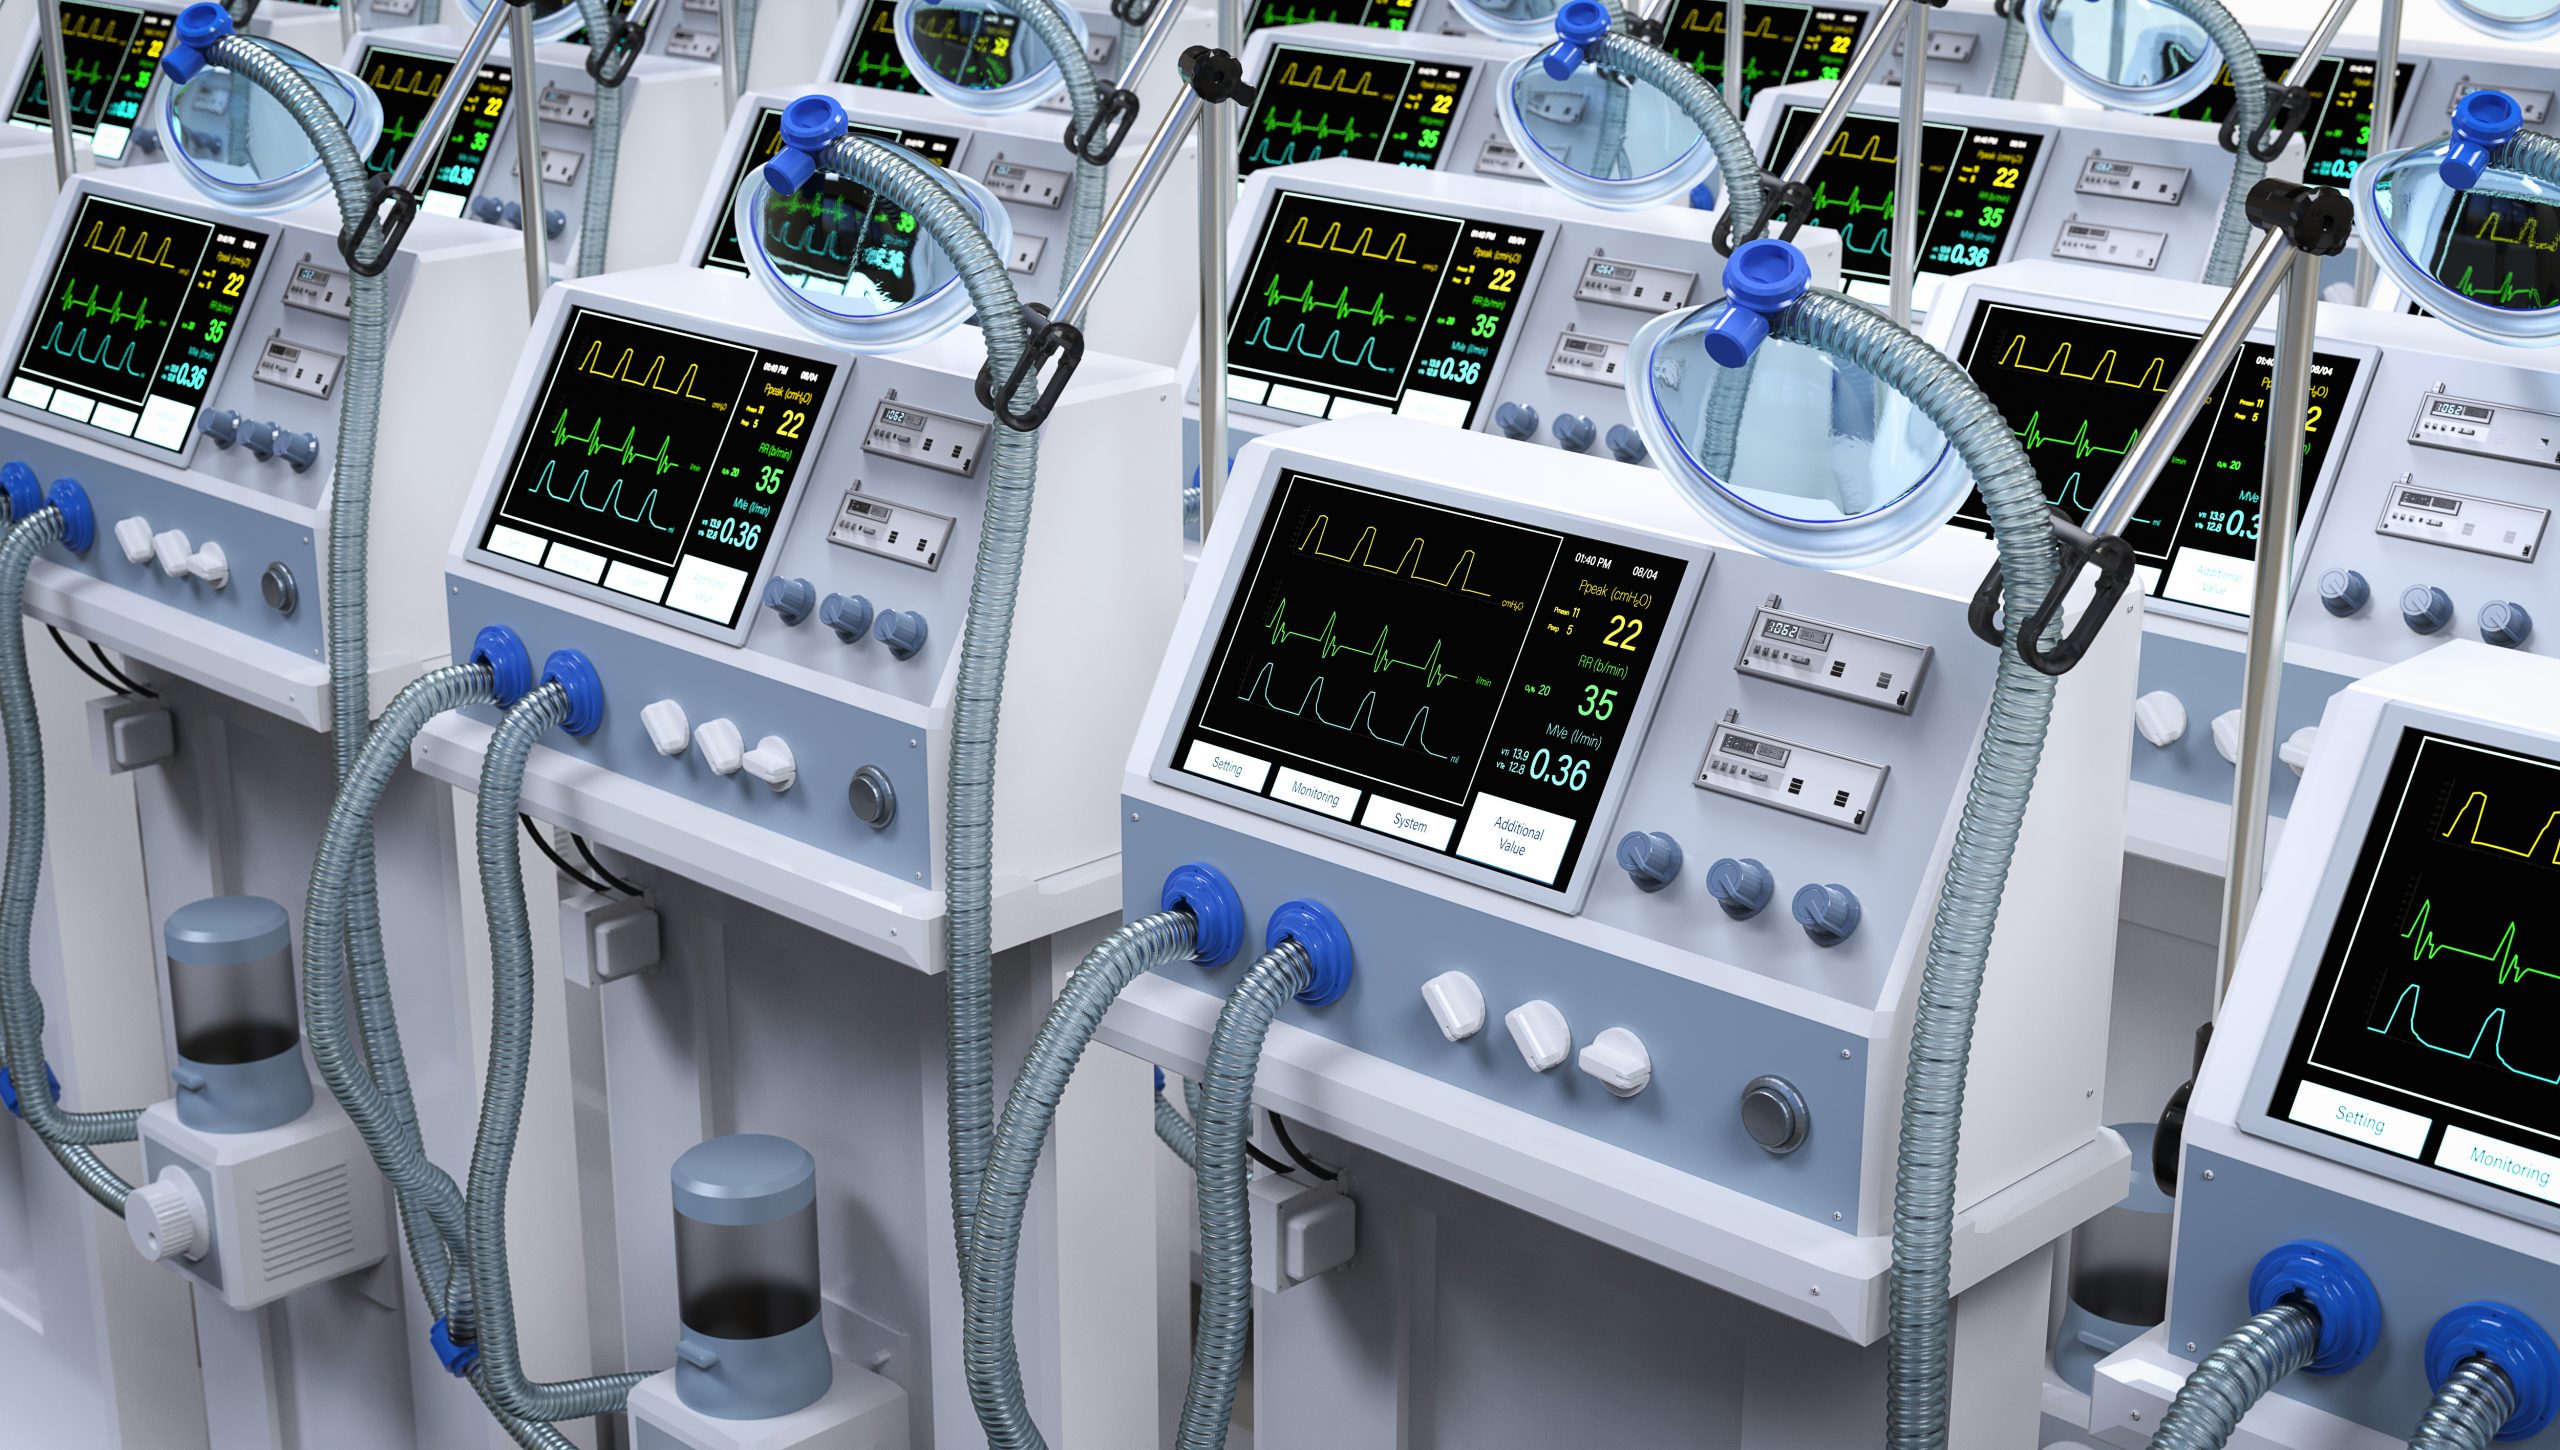 Medical Ventilator Devices and Displays